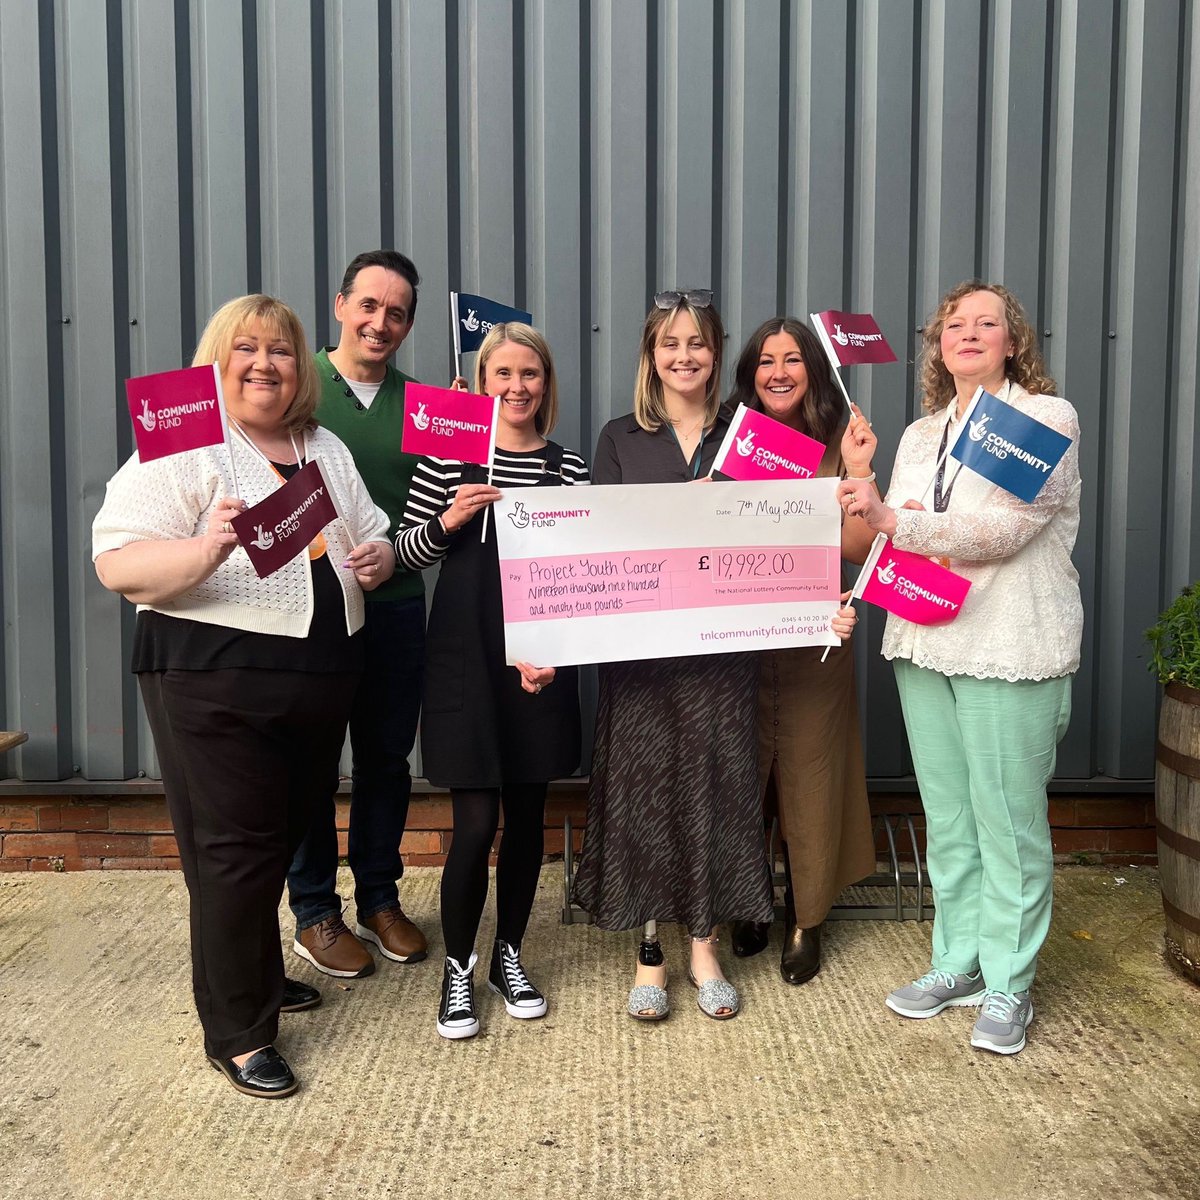 We are delighted to announce that we have received an incredible £19,992 from @TNLComFund thanks to #NationalLottery players, to support our community of young cancer patients and help them to thrive. Thank you!